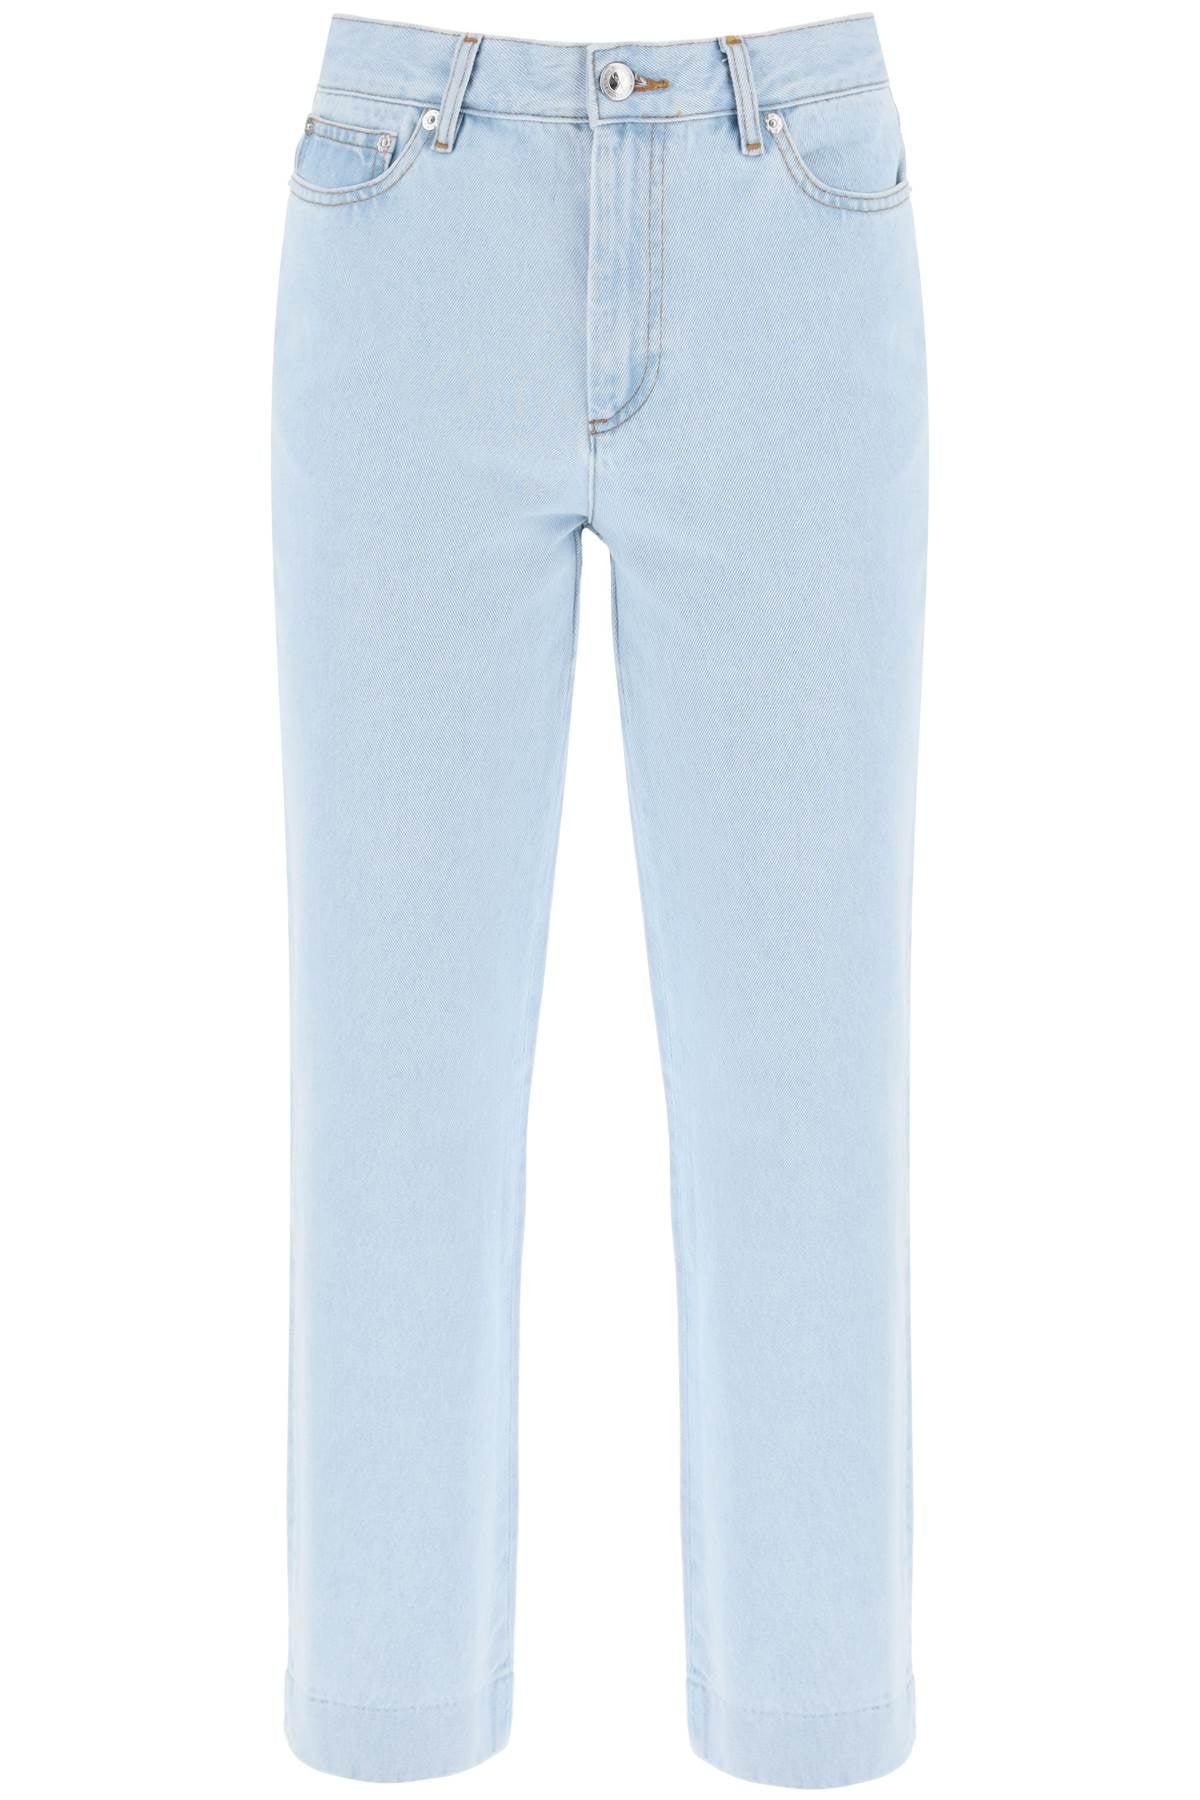 A.p.c. new sailor straight cut cropped jeans COGXK F09131 BLEACHED OUT